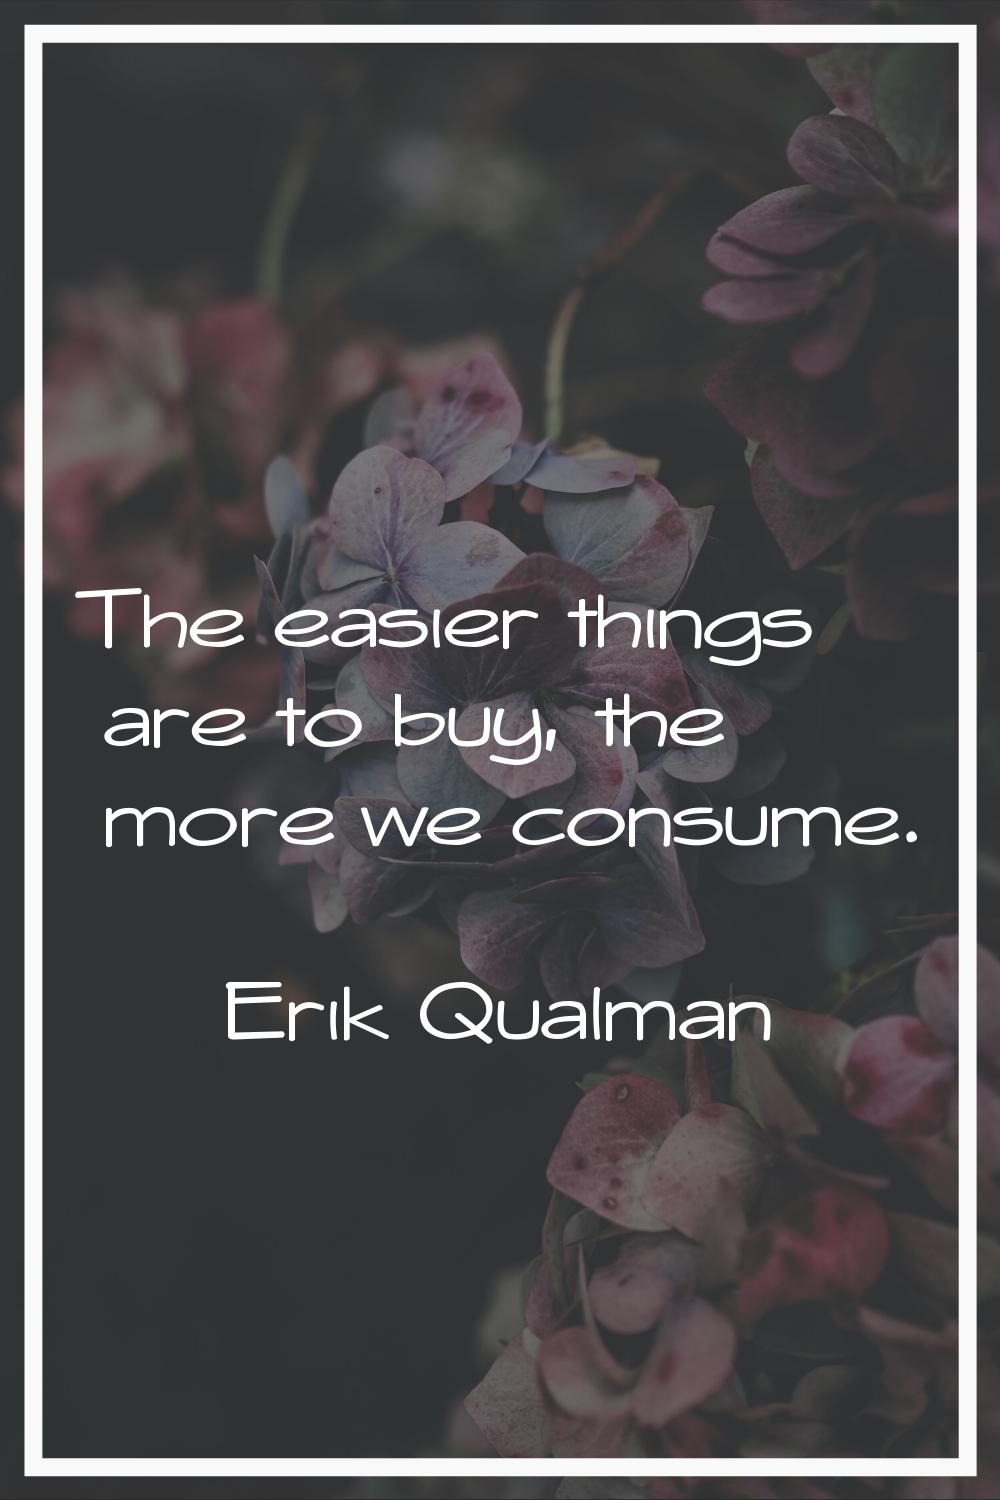 The easier things are to buy, the more we consume.